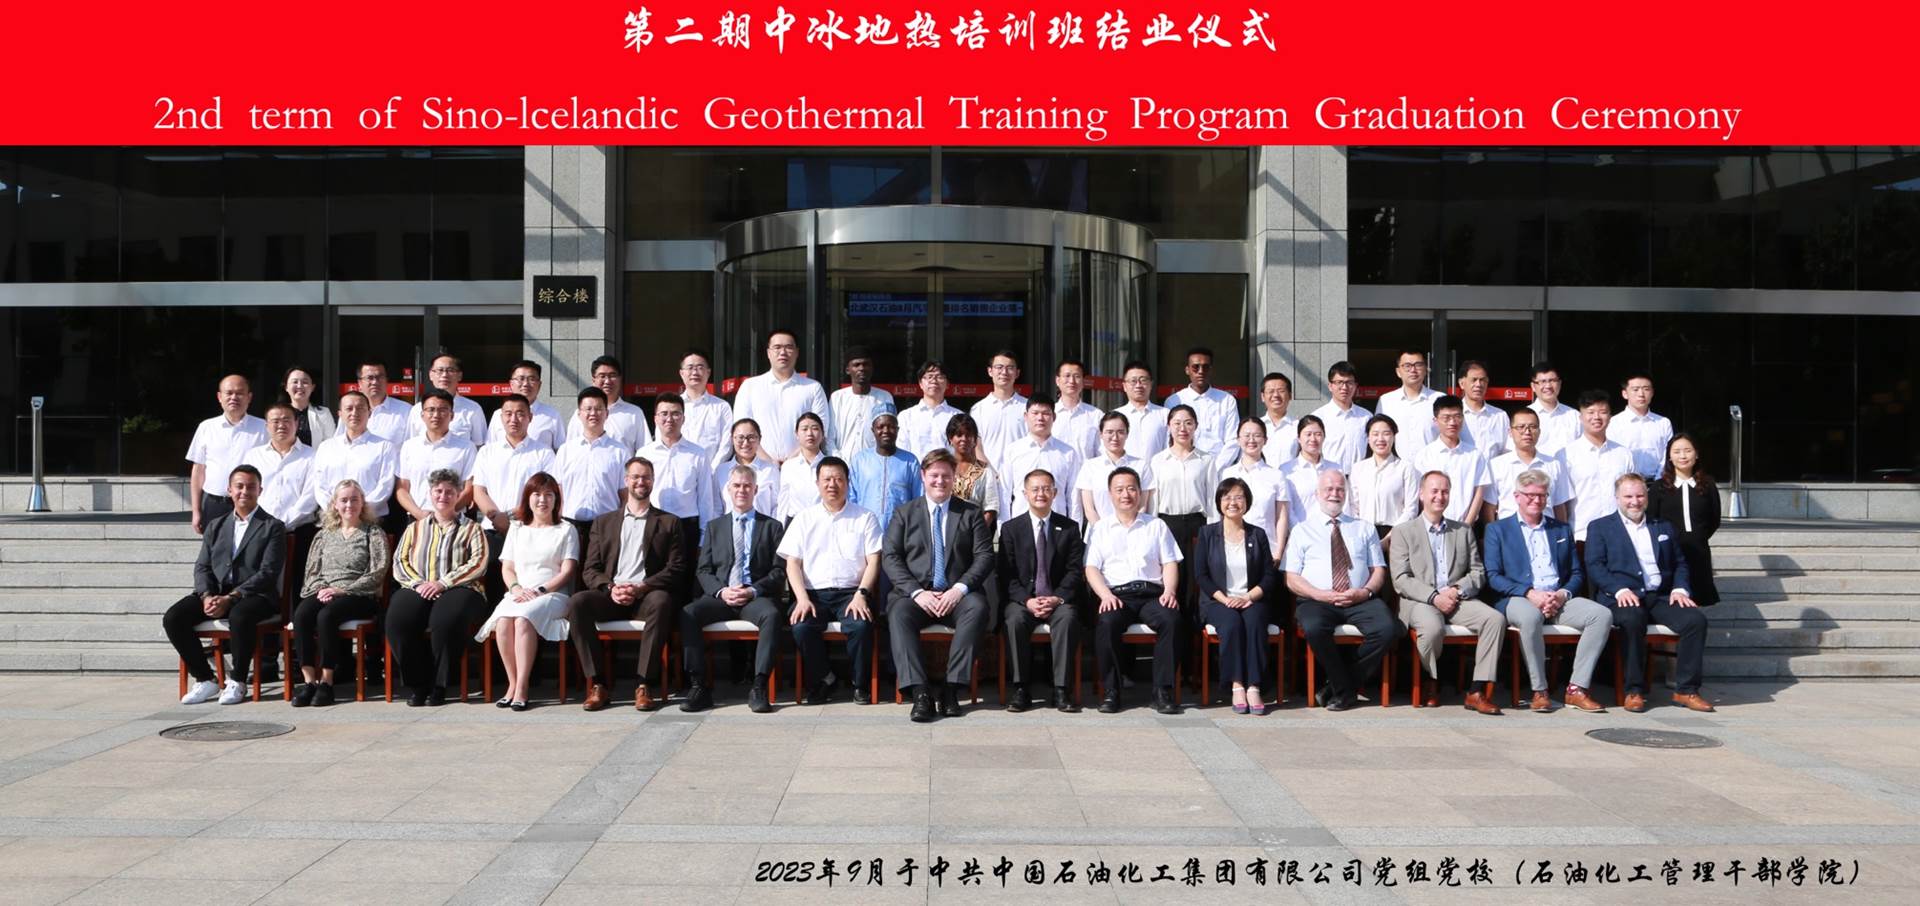 Graduate Ceremony of the 2nd Sino-Icelandic Geothermal Training Programme - mynd